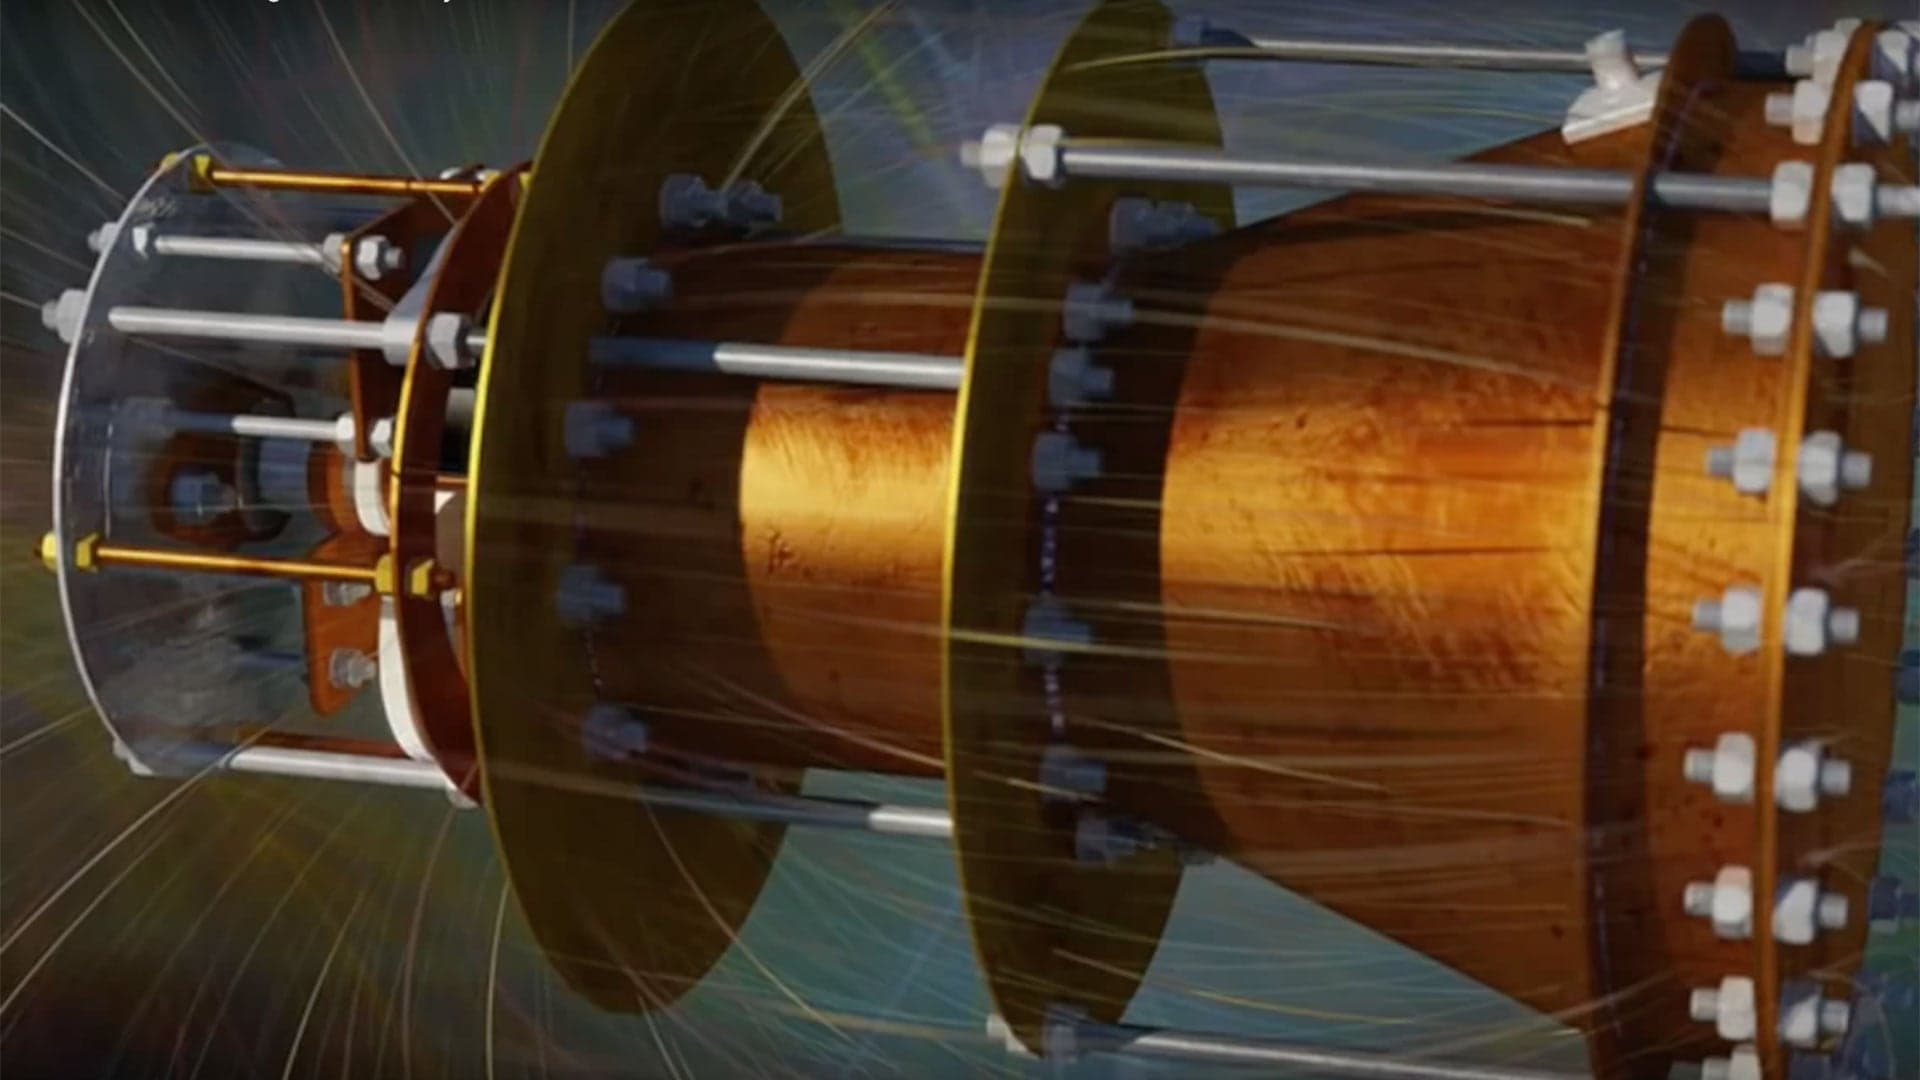 Impossible Spaceship Engine Called “EmDrive” Actually Works, Leaked NASA Report Reveals